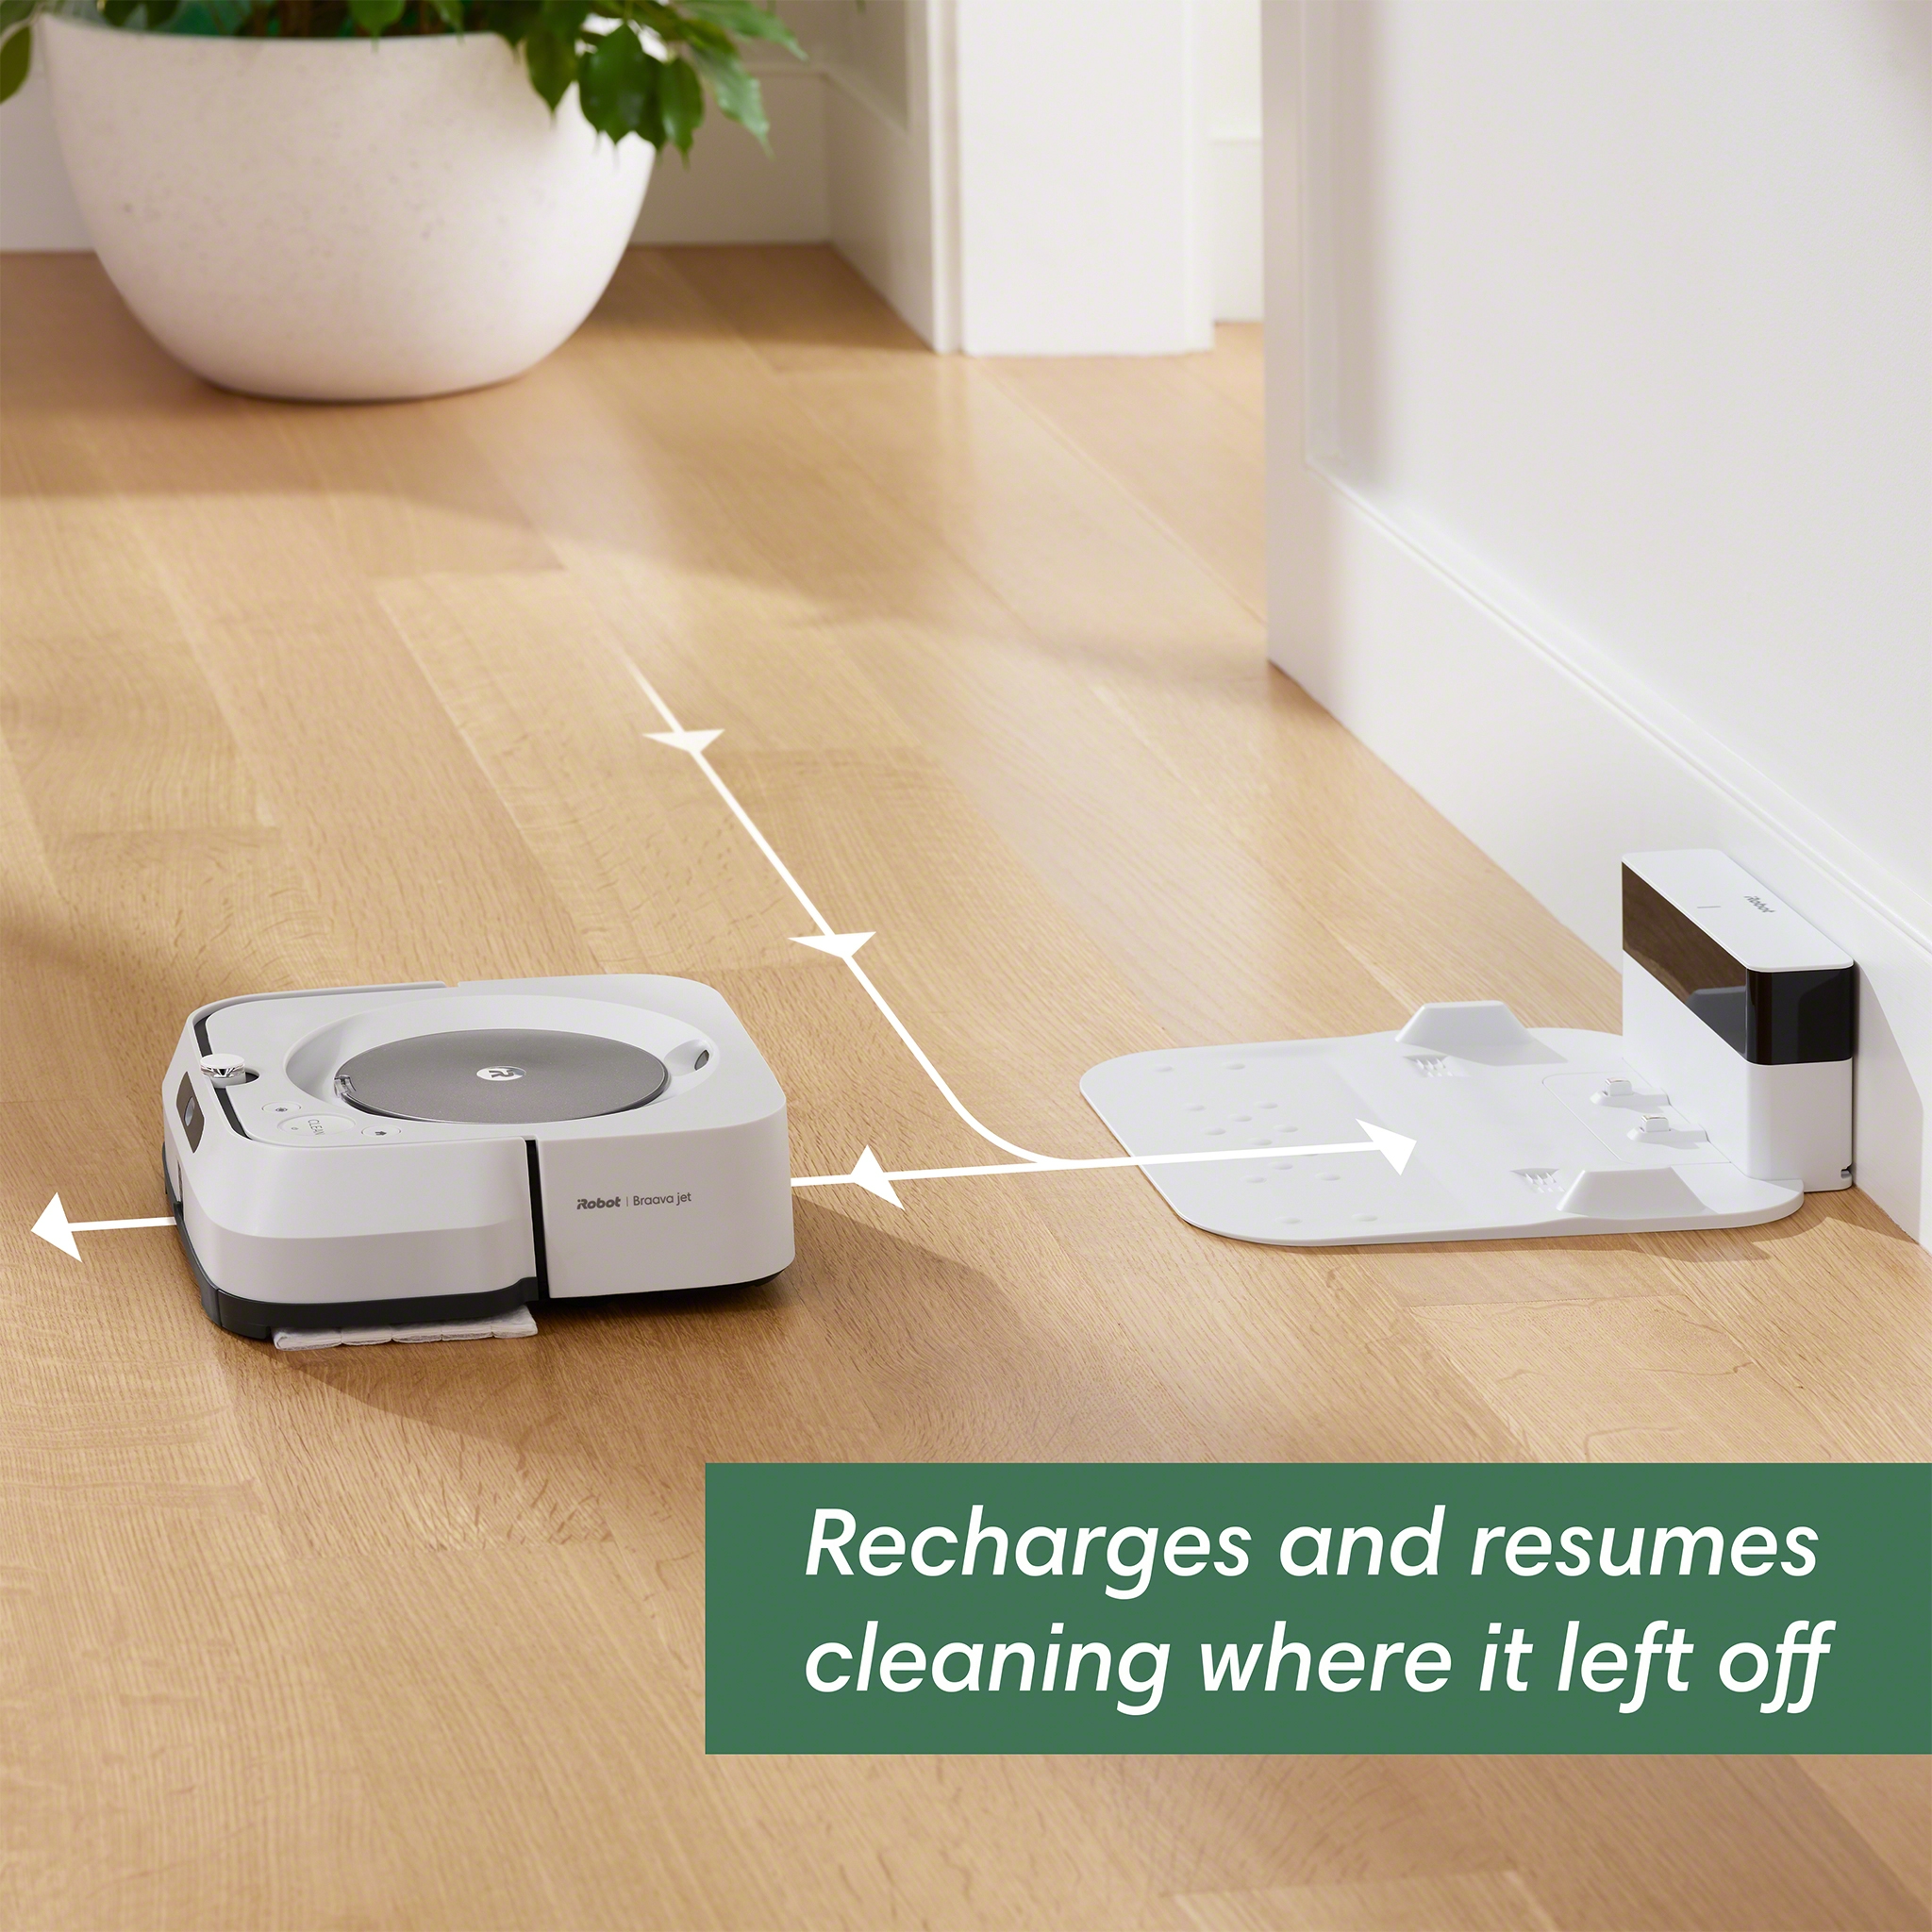 iRobot Braava Jet M6 (6110) Ultimate Robot Mop- Wi-Fi Connected, Precision Jet Spray, Smart Mapping, Works with Google Home, Ideal for Multiple Rooms, Recharges and Resumes - image 16 of 23